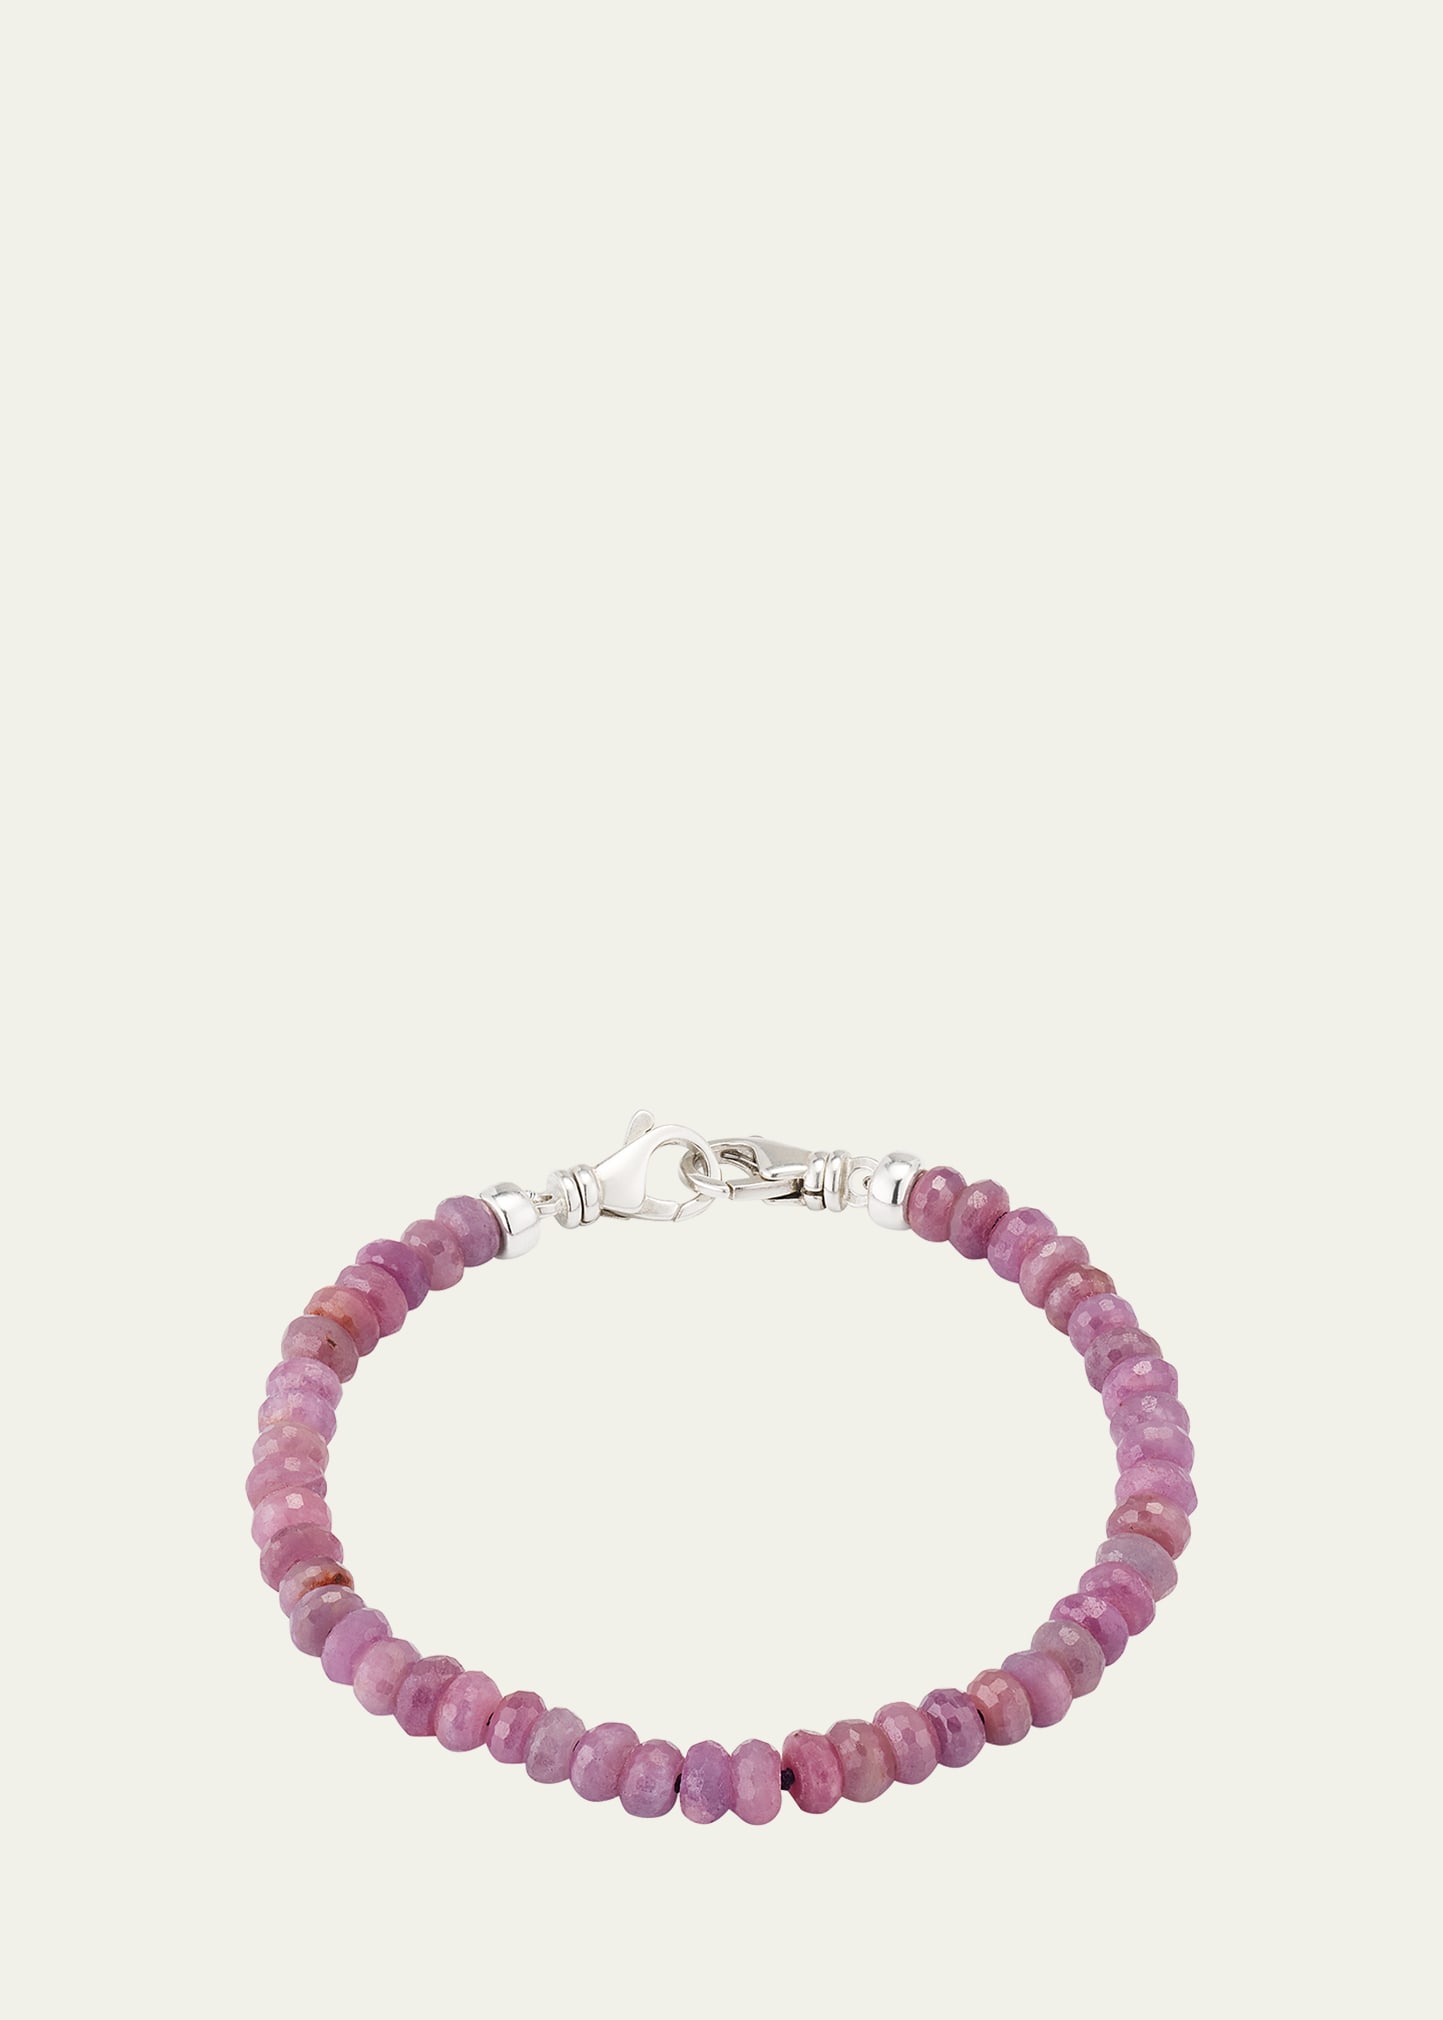 Men's Pink Sapphire Beaded Bracelet with Sterling Silver